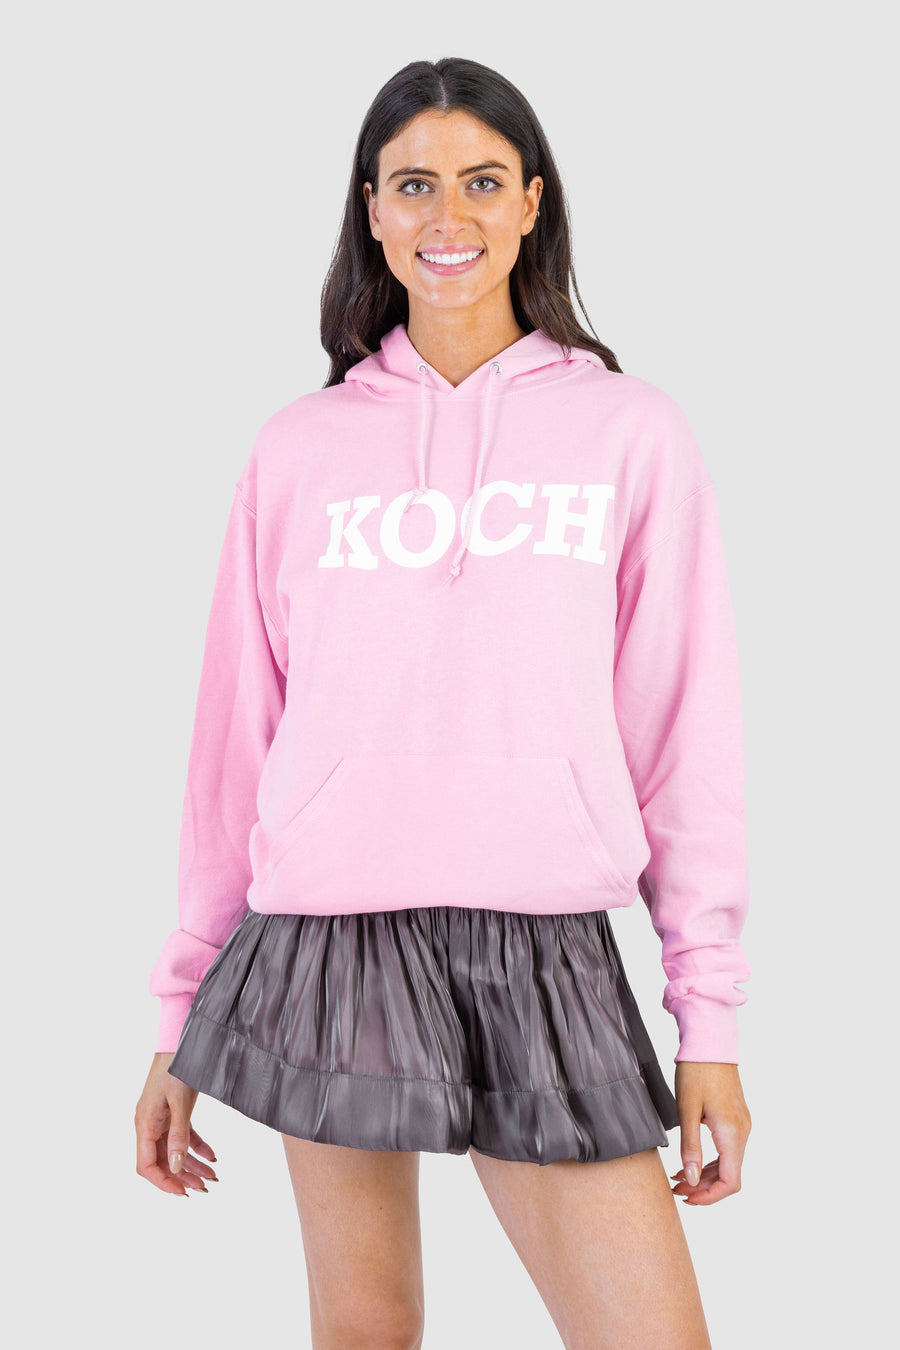 KOCH Grace Hoodie Pink *Limited*Edition*